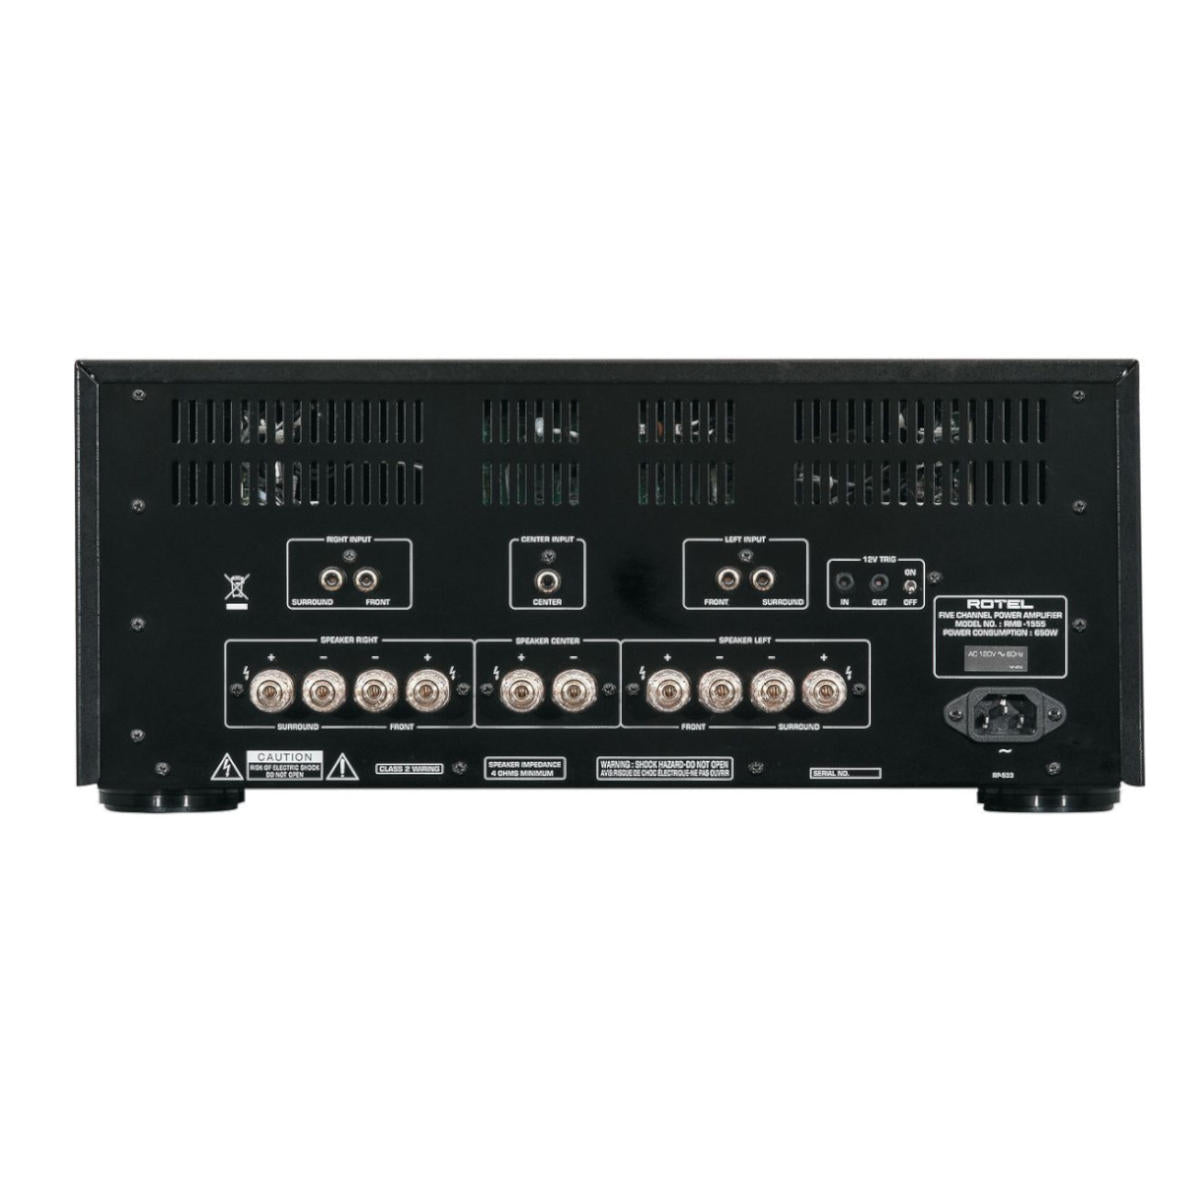 Rotel RMB-1555 Power Amplifier - Rear View